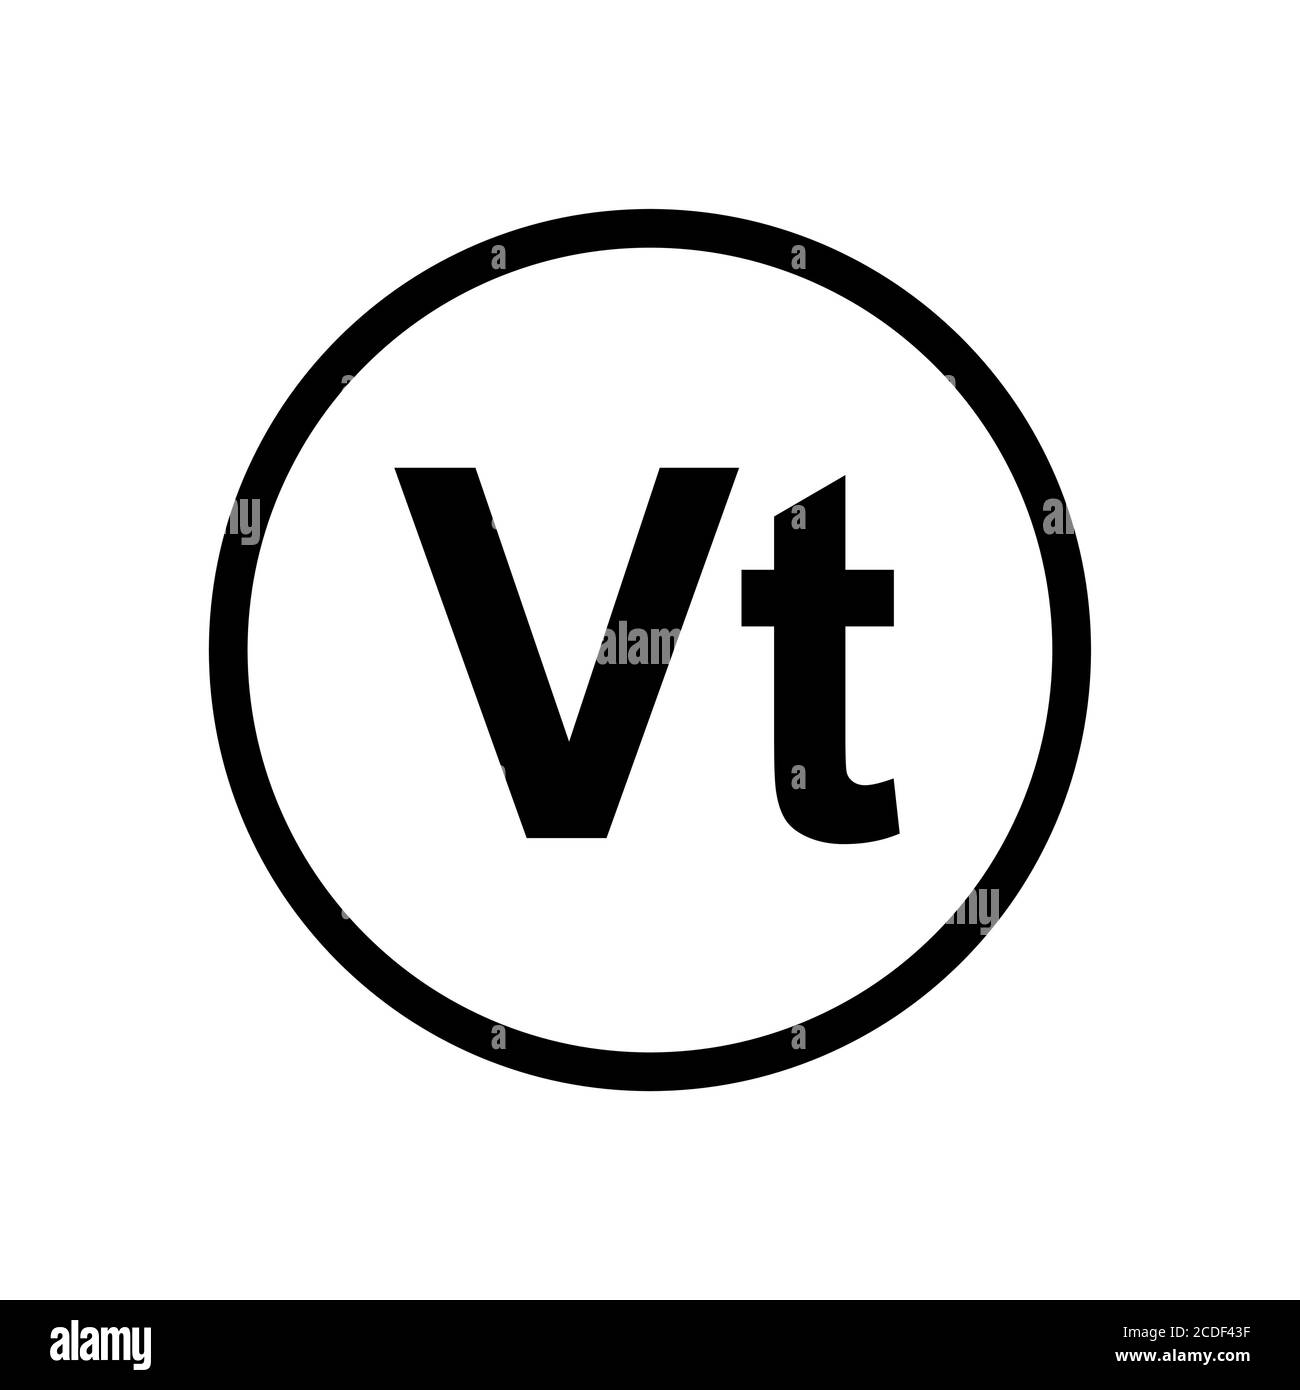 Vatu coin monochrome black and white. Current currency symbol. Stock Vector